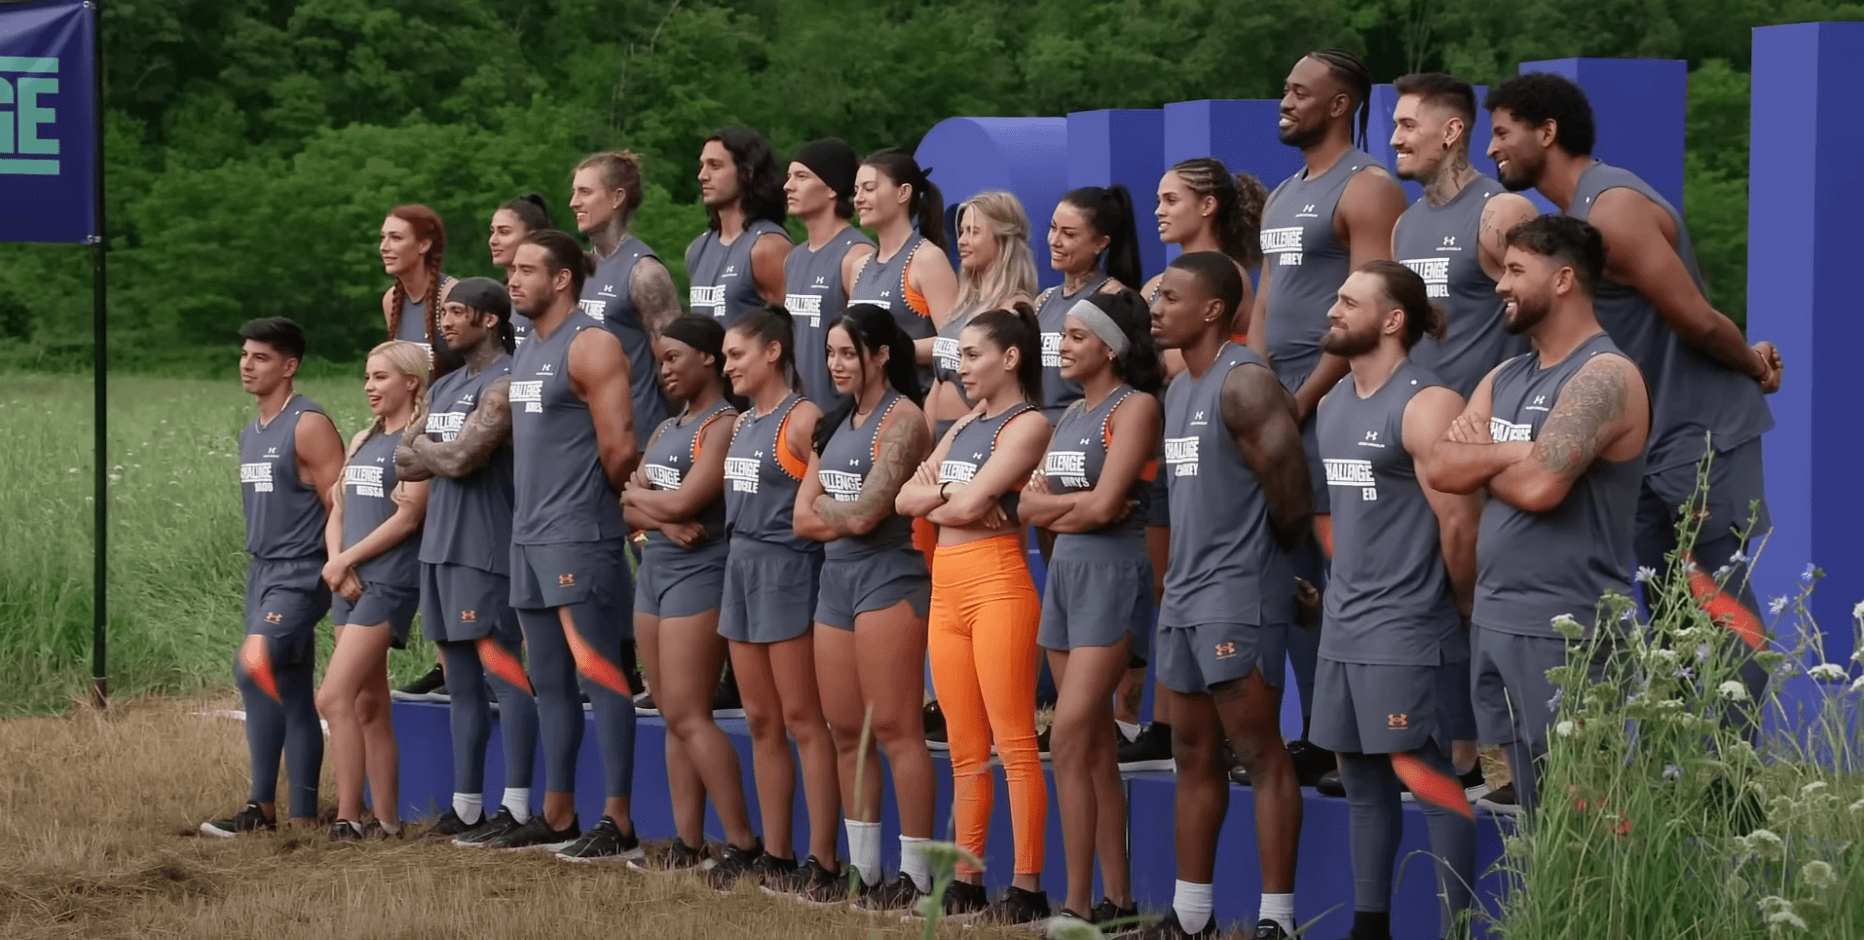 'The Challenge' Season 39 cast standing together before a challenge